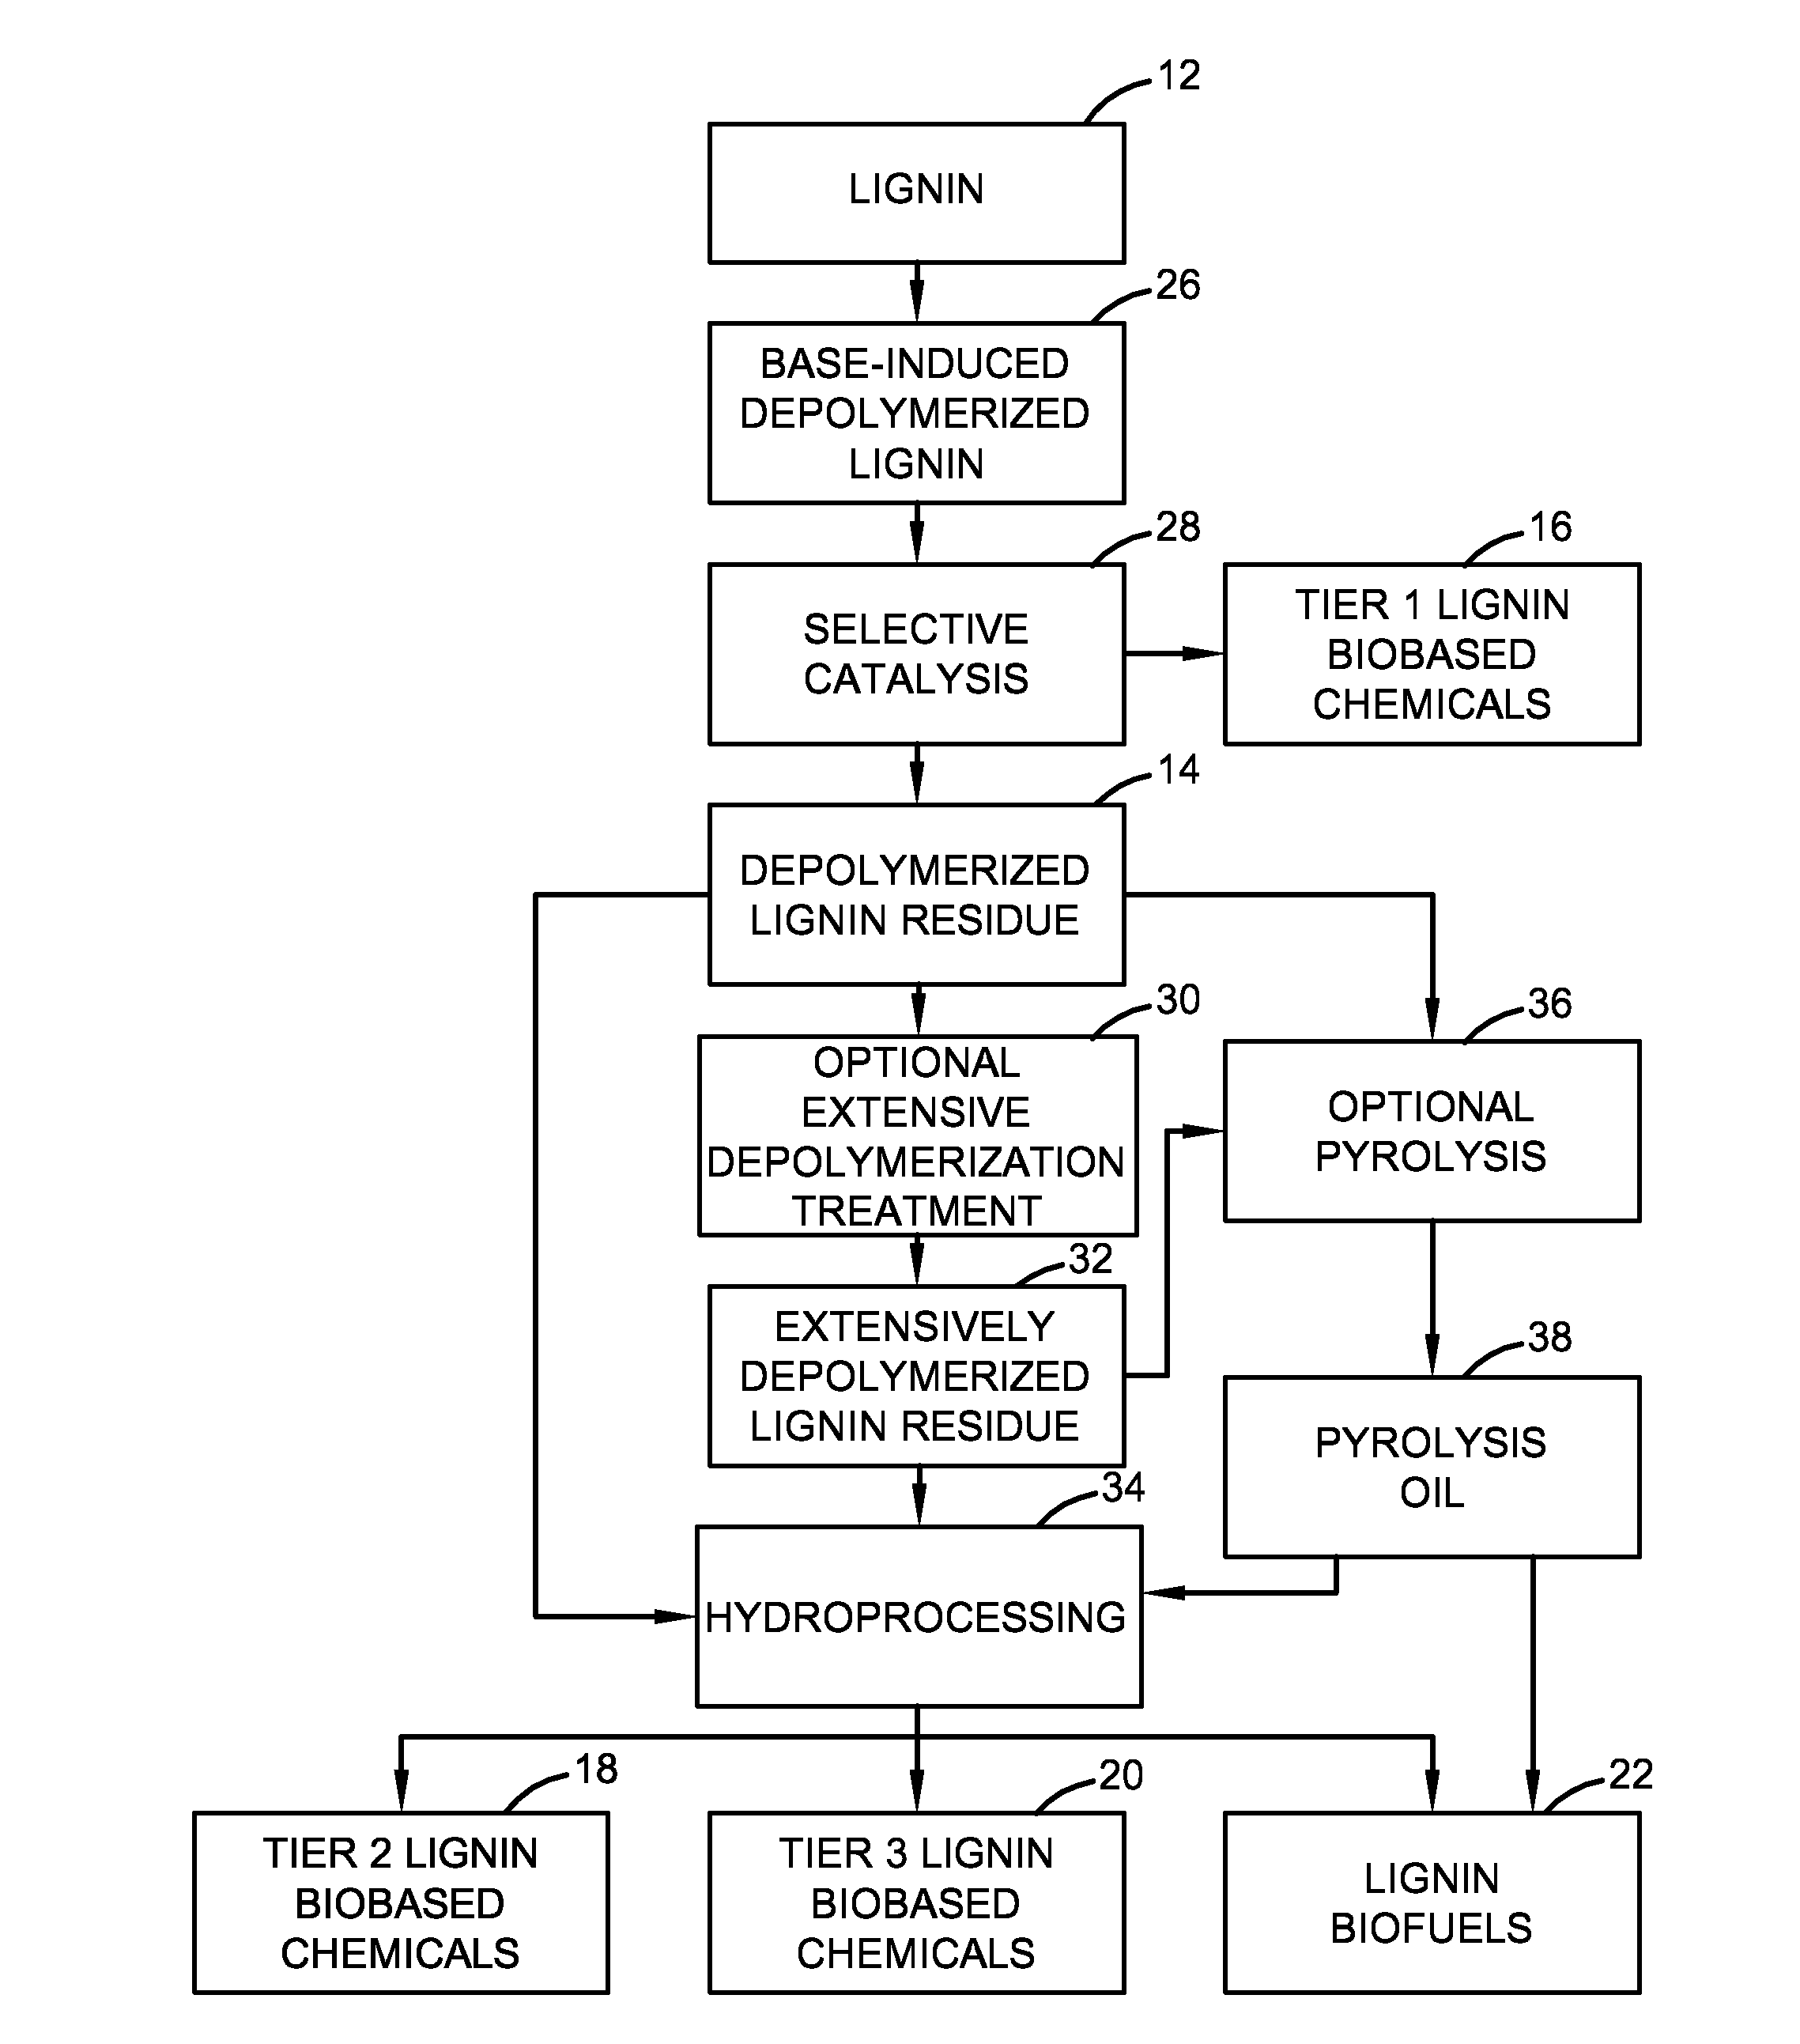 Method for tiered production of biobased chemicals and biofuels from lignin